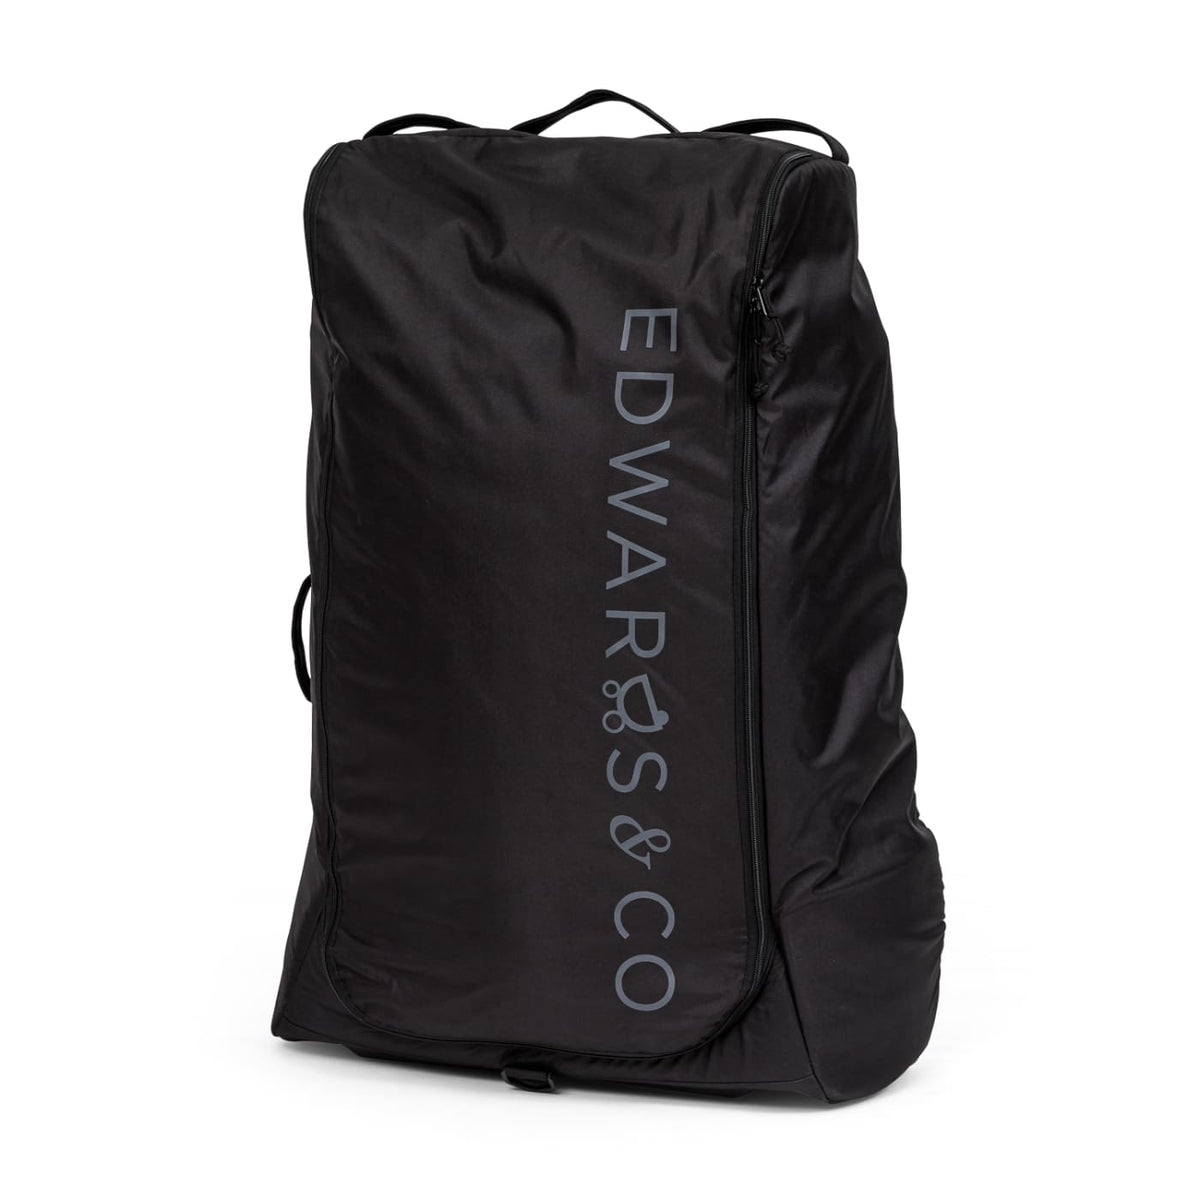 Edwards &amp; Co Travel Bag - ON THE GO - TRANSPORT BAGS